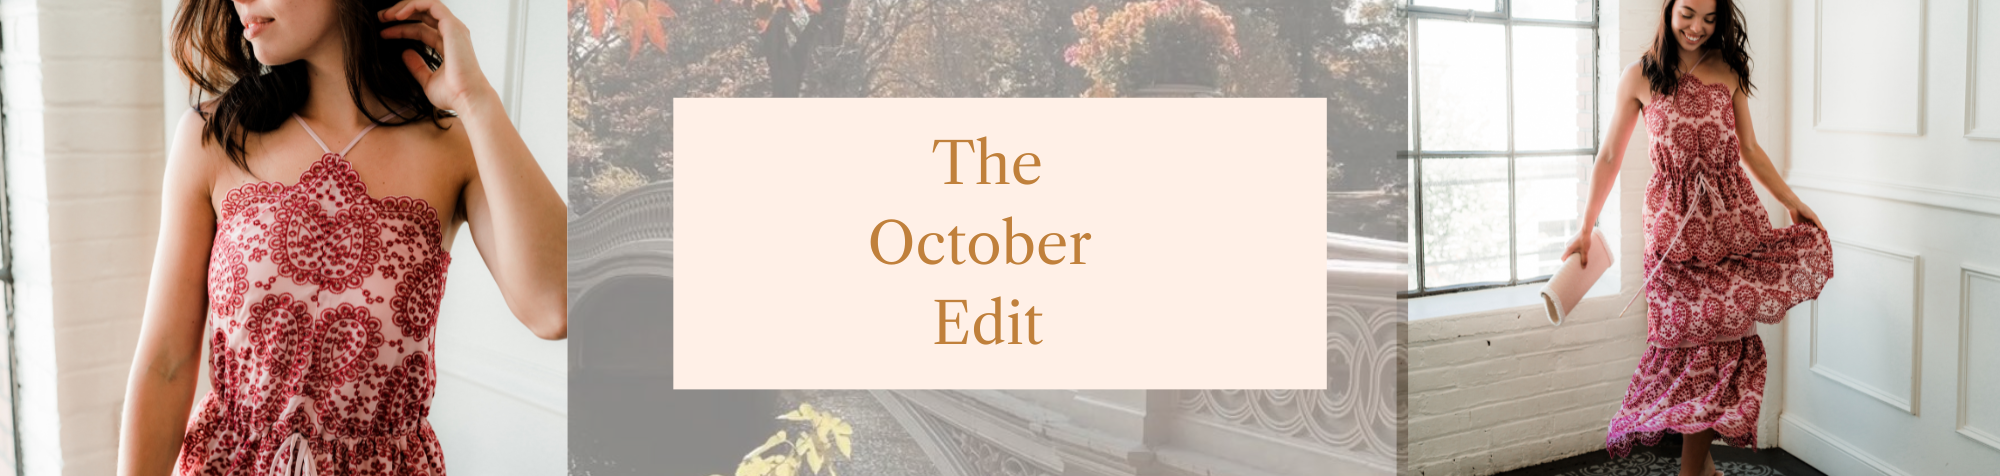 The October Edit